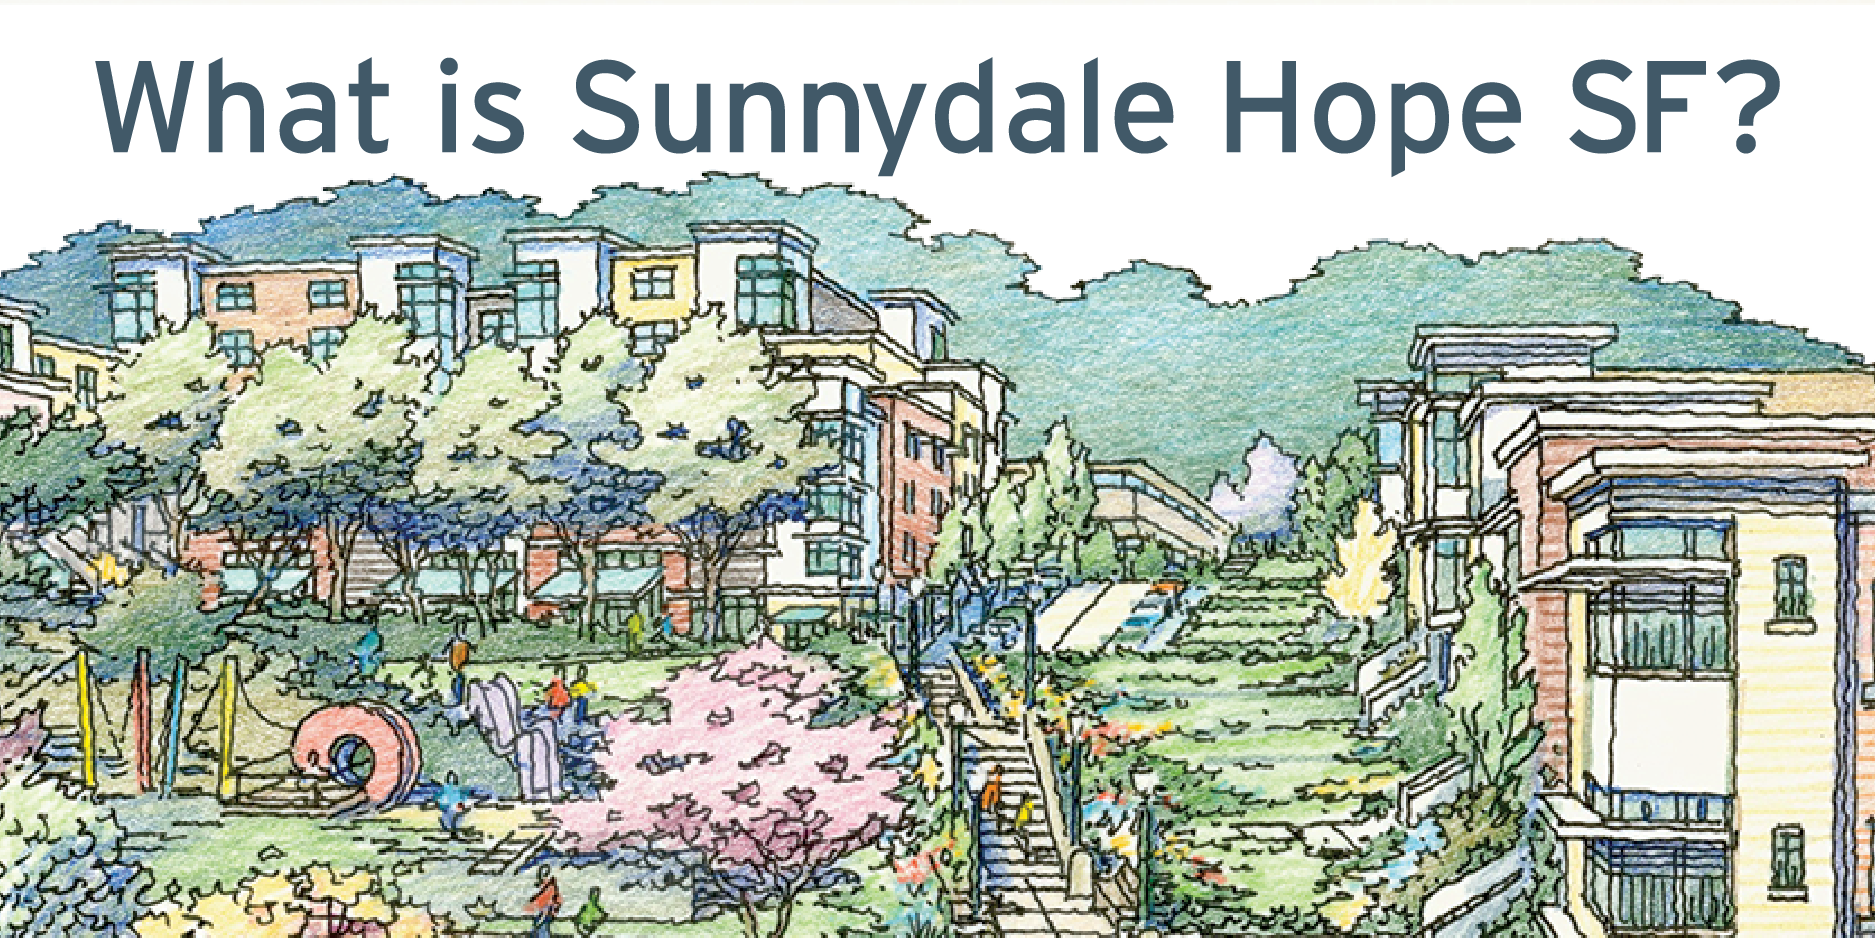 A sketch of Sunnydale Hope San Francisco's neighborhood, with the title "What is Sunnydale Hope SF?"